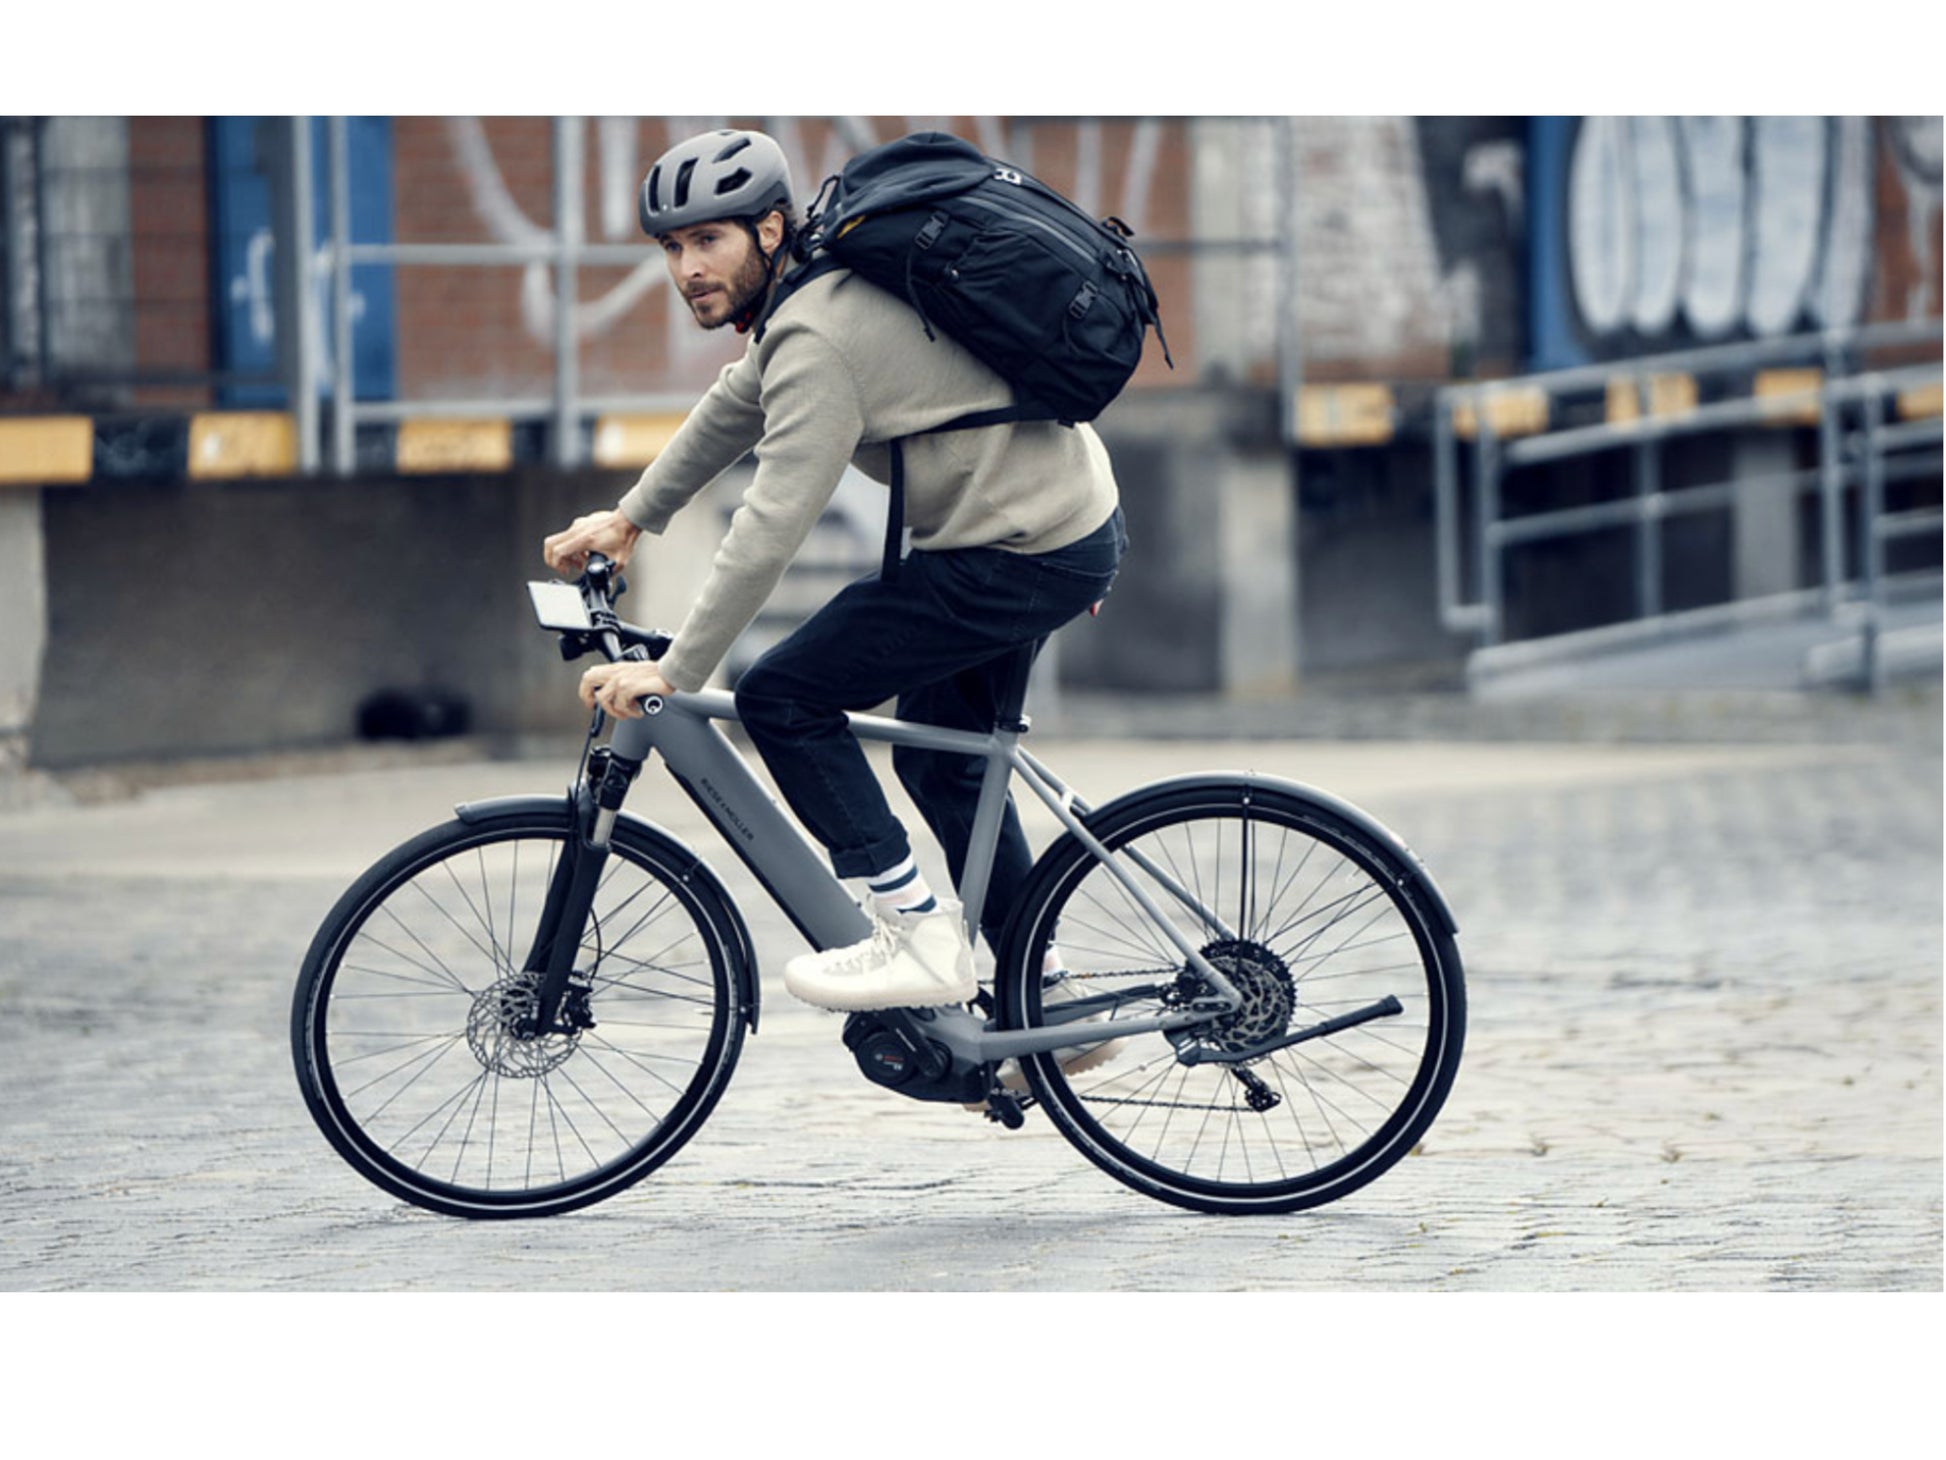 Riese and Muller Roadster Vario eMTB hardtail man touring with backpack smartphone cockpit